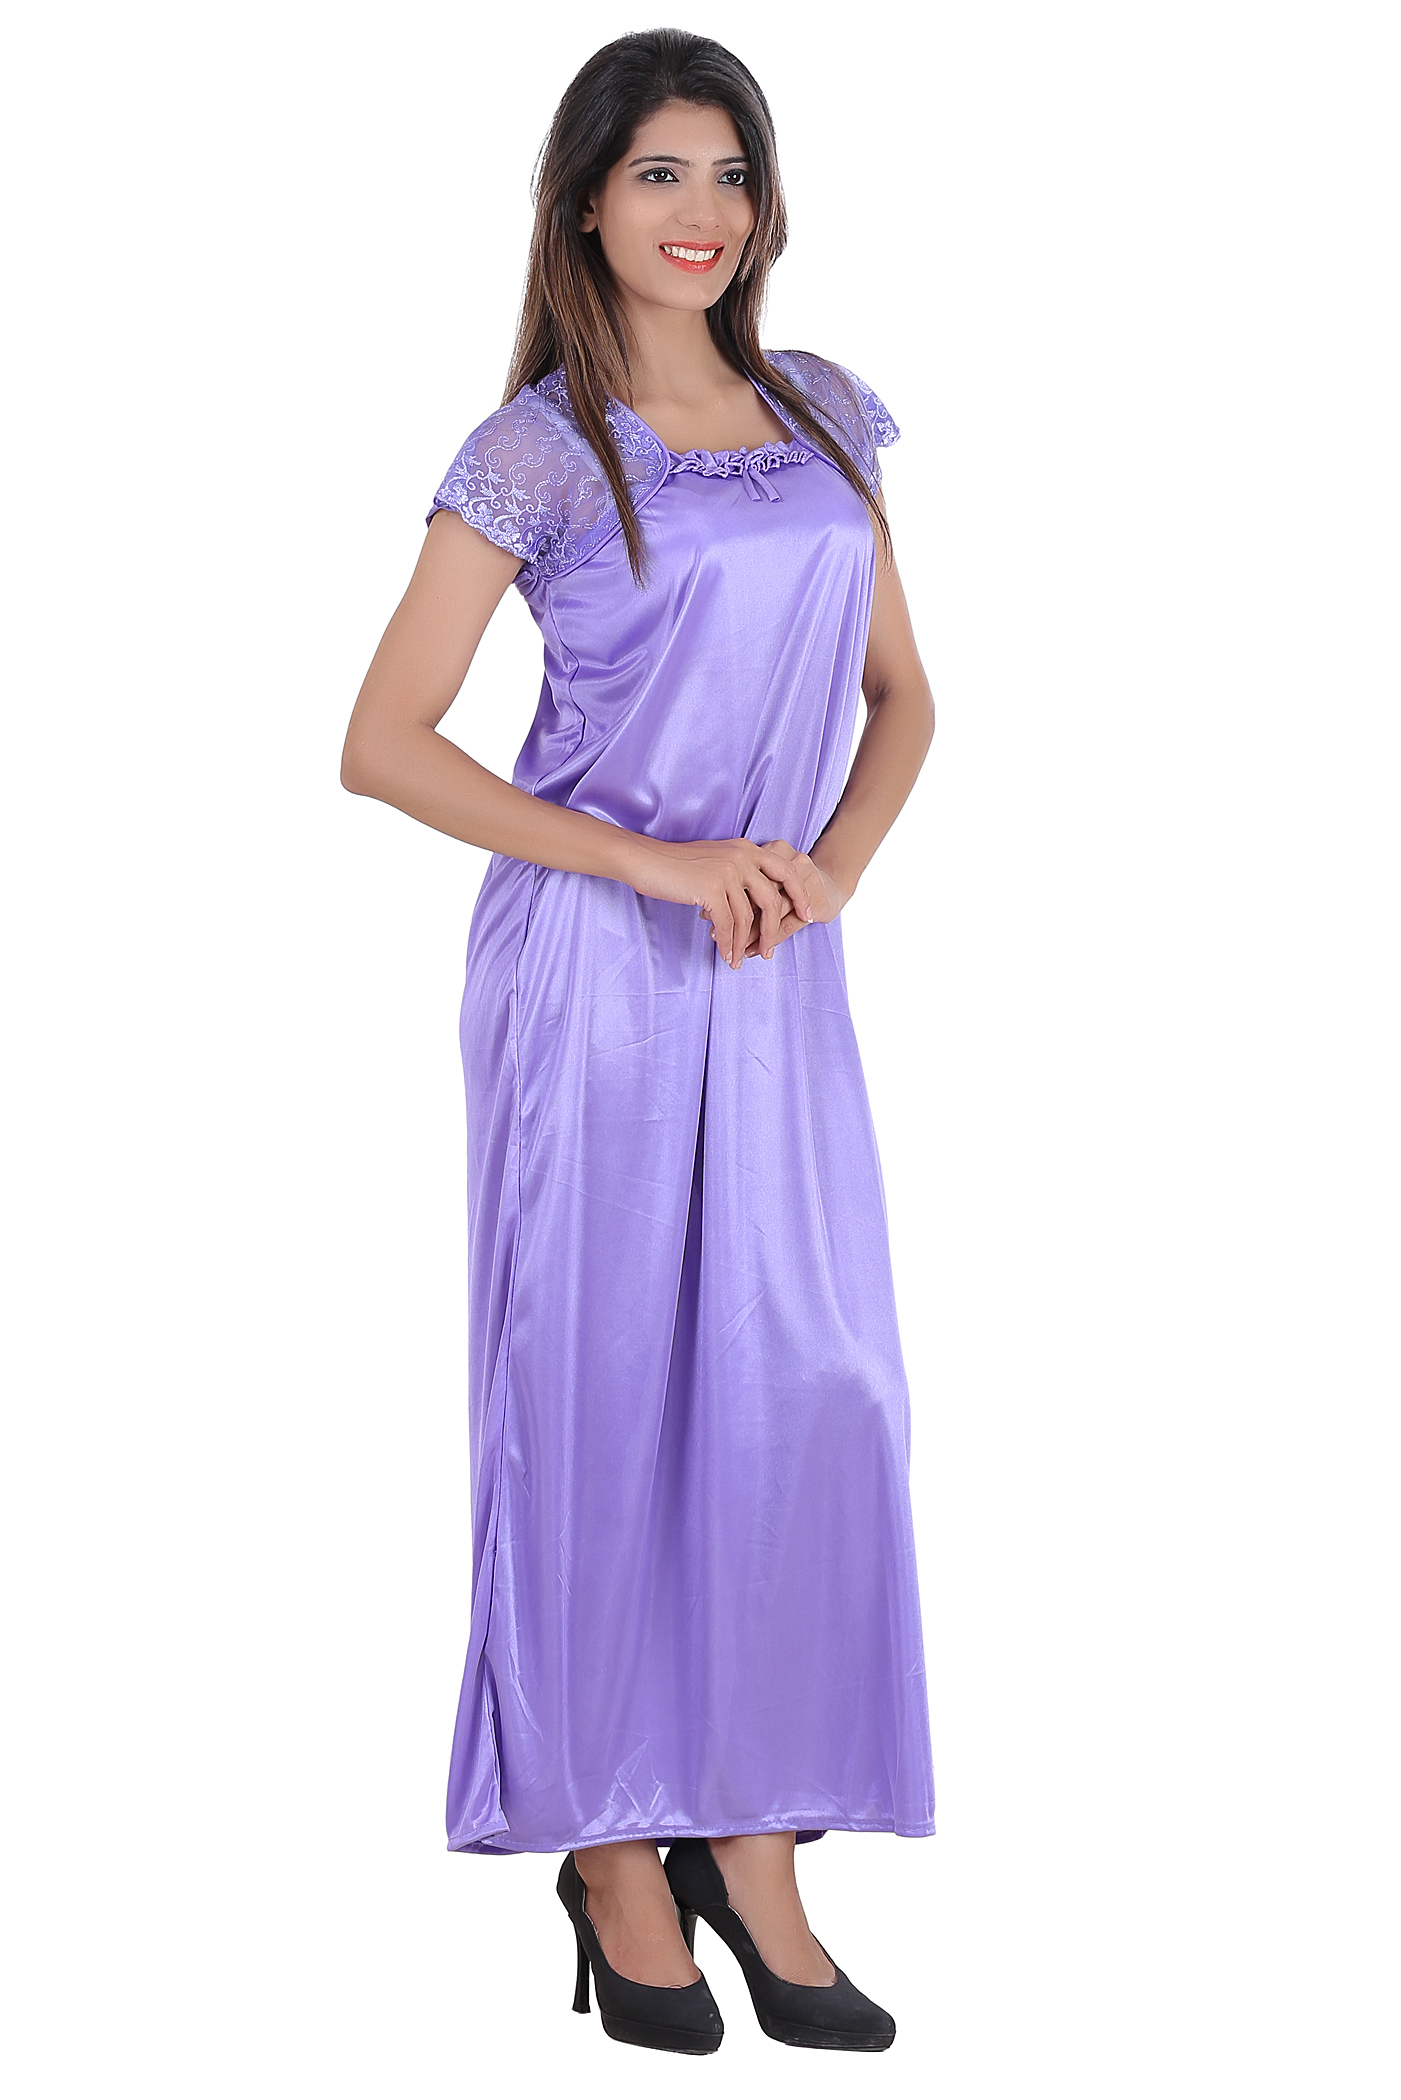 Buy Glossia Purple Satin Nighty And Night Gowns Online ₹399 From Shopclues 9011